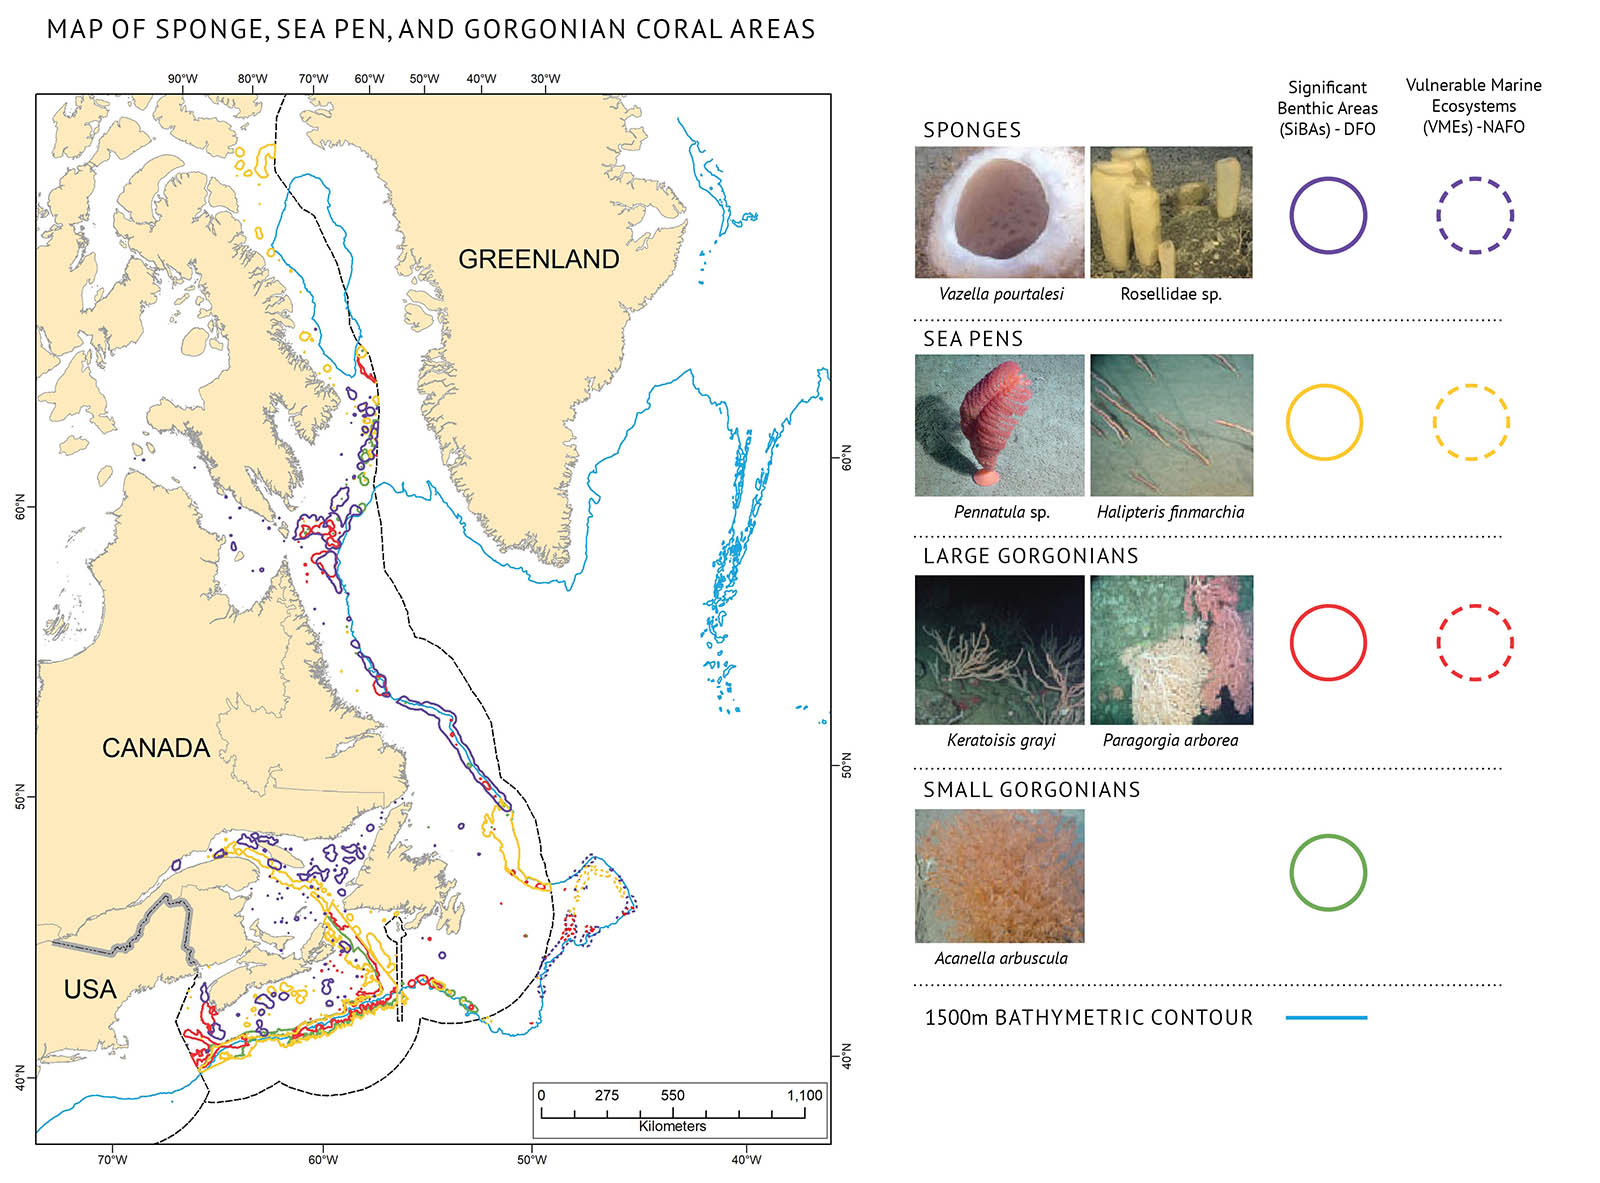 Figure 16: Left: Map of significant benthic areas (SiBAs) and vulnerable marine ecosystems (VMEs) for sponges, sea pens, large and small gorgonian corals on the east coast of Canada. SiBAs are identified by DFO within the 200nm Exclusive Economic Zone (EEZ) boundary while VMEs are outside the EEZ as identified by NAFO. Right: Examples of sponges, sea pens, large and small gorgonians found in the Canadian Atlantic. Corals and sponges tend to be distributed in the cold waters along the edges of the continental shelf down to 3000 metres depth. They are very vulnerable to human activities. A map of the Canadian Atlantic illustrating the locations of significant benthic areas (SiBAs) and vulnerable marine ecosystems (VMEs) for sponges, sea pens, large and small gorgonian corals. The map shows Baffin Island and Greenland in the north and eastern Canada and the United States in the south out into the central Atlantic. On the left and right sides of the map, tick marks show the 40°N, 50°N, and 60°N latitude lines, and on the bottom of the map, tick marks show the 70°W, 60°W, 50°W, and 40°W longitude lines. A scale bar appears at the bottom right corner of the map. The land masses on the map are coloured beige and the water is white. Text on the land identifies “Canada”, “USA”, and “Greenland”. A legend appears at the right-hand side outside the map. Sponges, sea pens, large gorgonians, and small gorgonians are represented by different colour outlines on the map. For each category, the legend has one or two photos and coloured circles of the corresponding category colour. Solid lines represent “Significant Benthic Areas (SiBAs) – DFO” and dashed lines represent “Vulnerable Marine Ecosystems (VMEs) – NAFO”. Above the top row of the legend there is text saying “Sponges”. Underneath there are two small photos with text saying “Vazella pourtalesi” and “Rosellidae sp.” respectively. The outlines representing sponges are purple. Above the second row there is text saying “Sea pens”. Underneath there are two small photos with text saying “pennatula sp.” and “Halipteris finmarchia” respectively. The outlines representing sea pens are yellow. Above the third row there is text saying “Large gorgonians”. Underneath there are two small photos with text saying “Keratoisis grayi” and “Paragorgia arborea” respectively. The outlines representing large gargonians are red. Above the fourth row there is text saying “Small gorgonians”. Underneath there is one small photo with text saying “Acanella arbuscula” respectively. The outlines representing large gargonians are green. The 1500m bathymetric contour of the shelf is outlined with a thin blue line. On the east coast of Canada, it outlines the Scotian Shelf and the Newfoundland and Labrador Shelves. North in the Labrador Sea It curves south of Baffin Island and then goes right around the tip of Greenland. Also indicated by a thin black line on the map is the Exclusive Economic Zone (EEZ) of Canada which is 200nm off the coast. Outlined areas within the EEZ are solid indicating SiBAs and outside they are dashed to indicating VMEs. The outlines for areas of corals and sponges are located mainly along the edge of the shelf along the 1500m bathymetric contour. There are also more outlined areas running between Nova Scotia and Newfoundland and within the Gulf of St. Lawrence which are mainly purple and yellow indicating areas of sponges and sea pens.